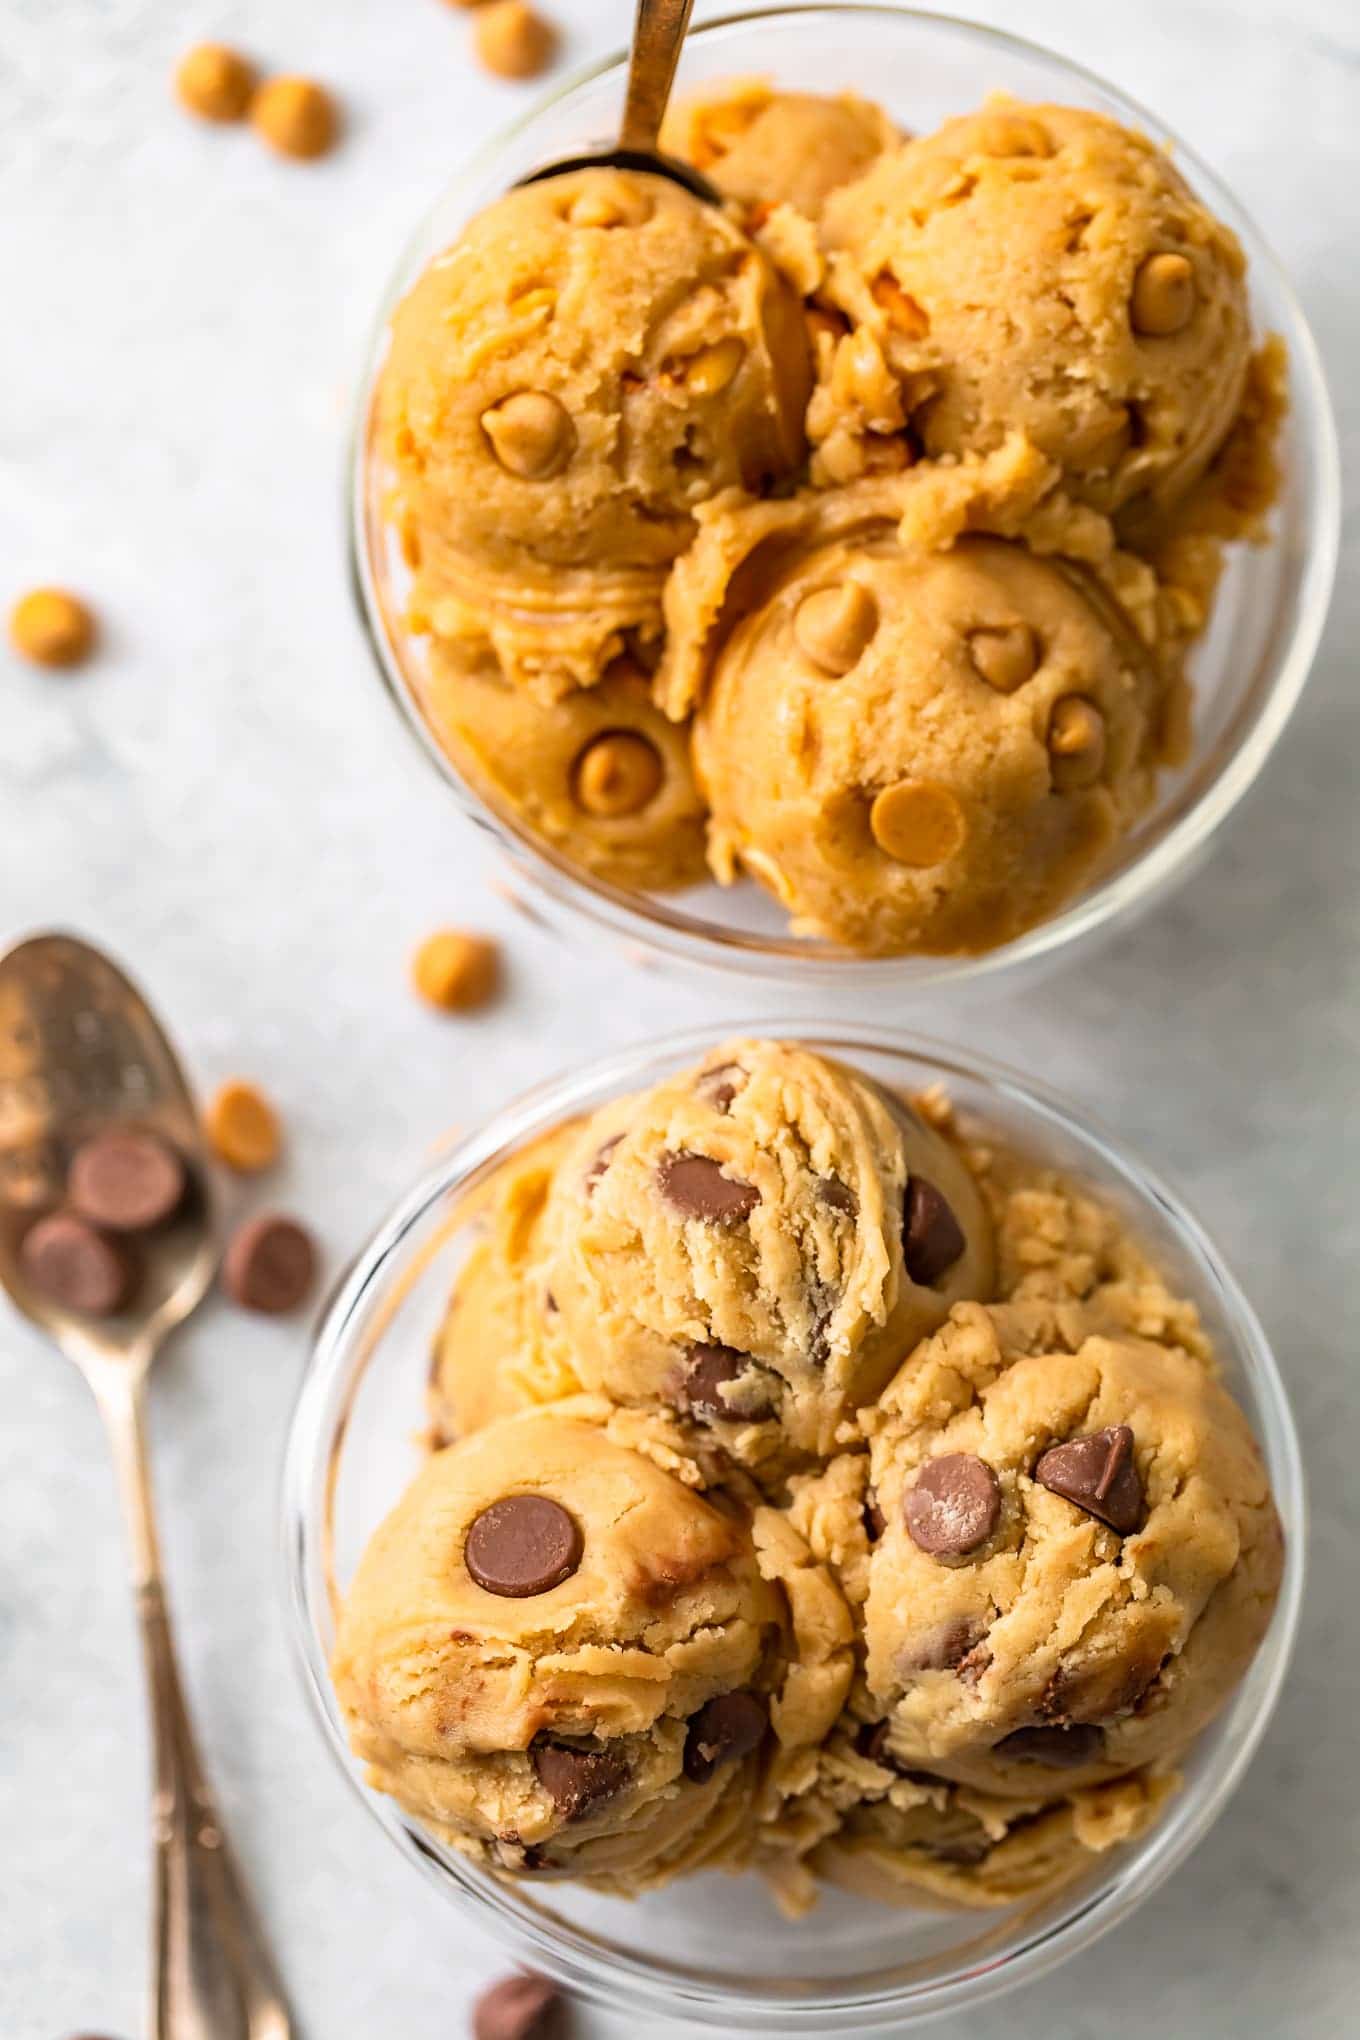 bowls of peanut butter cookie dough and chocolate chip cookie dough